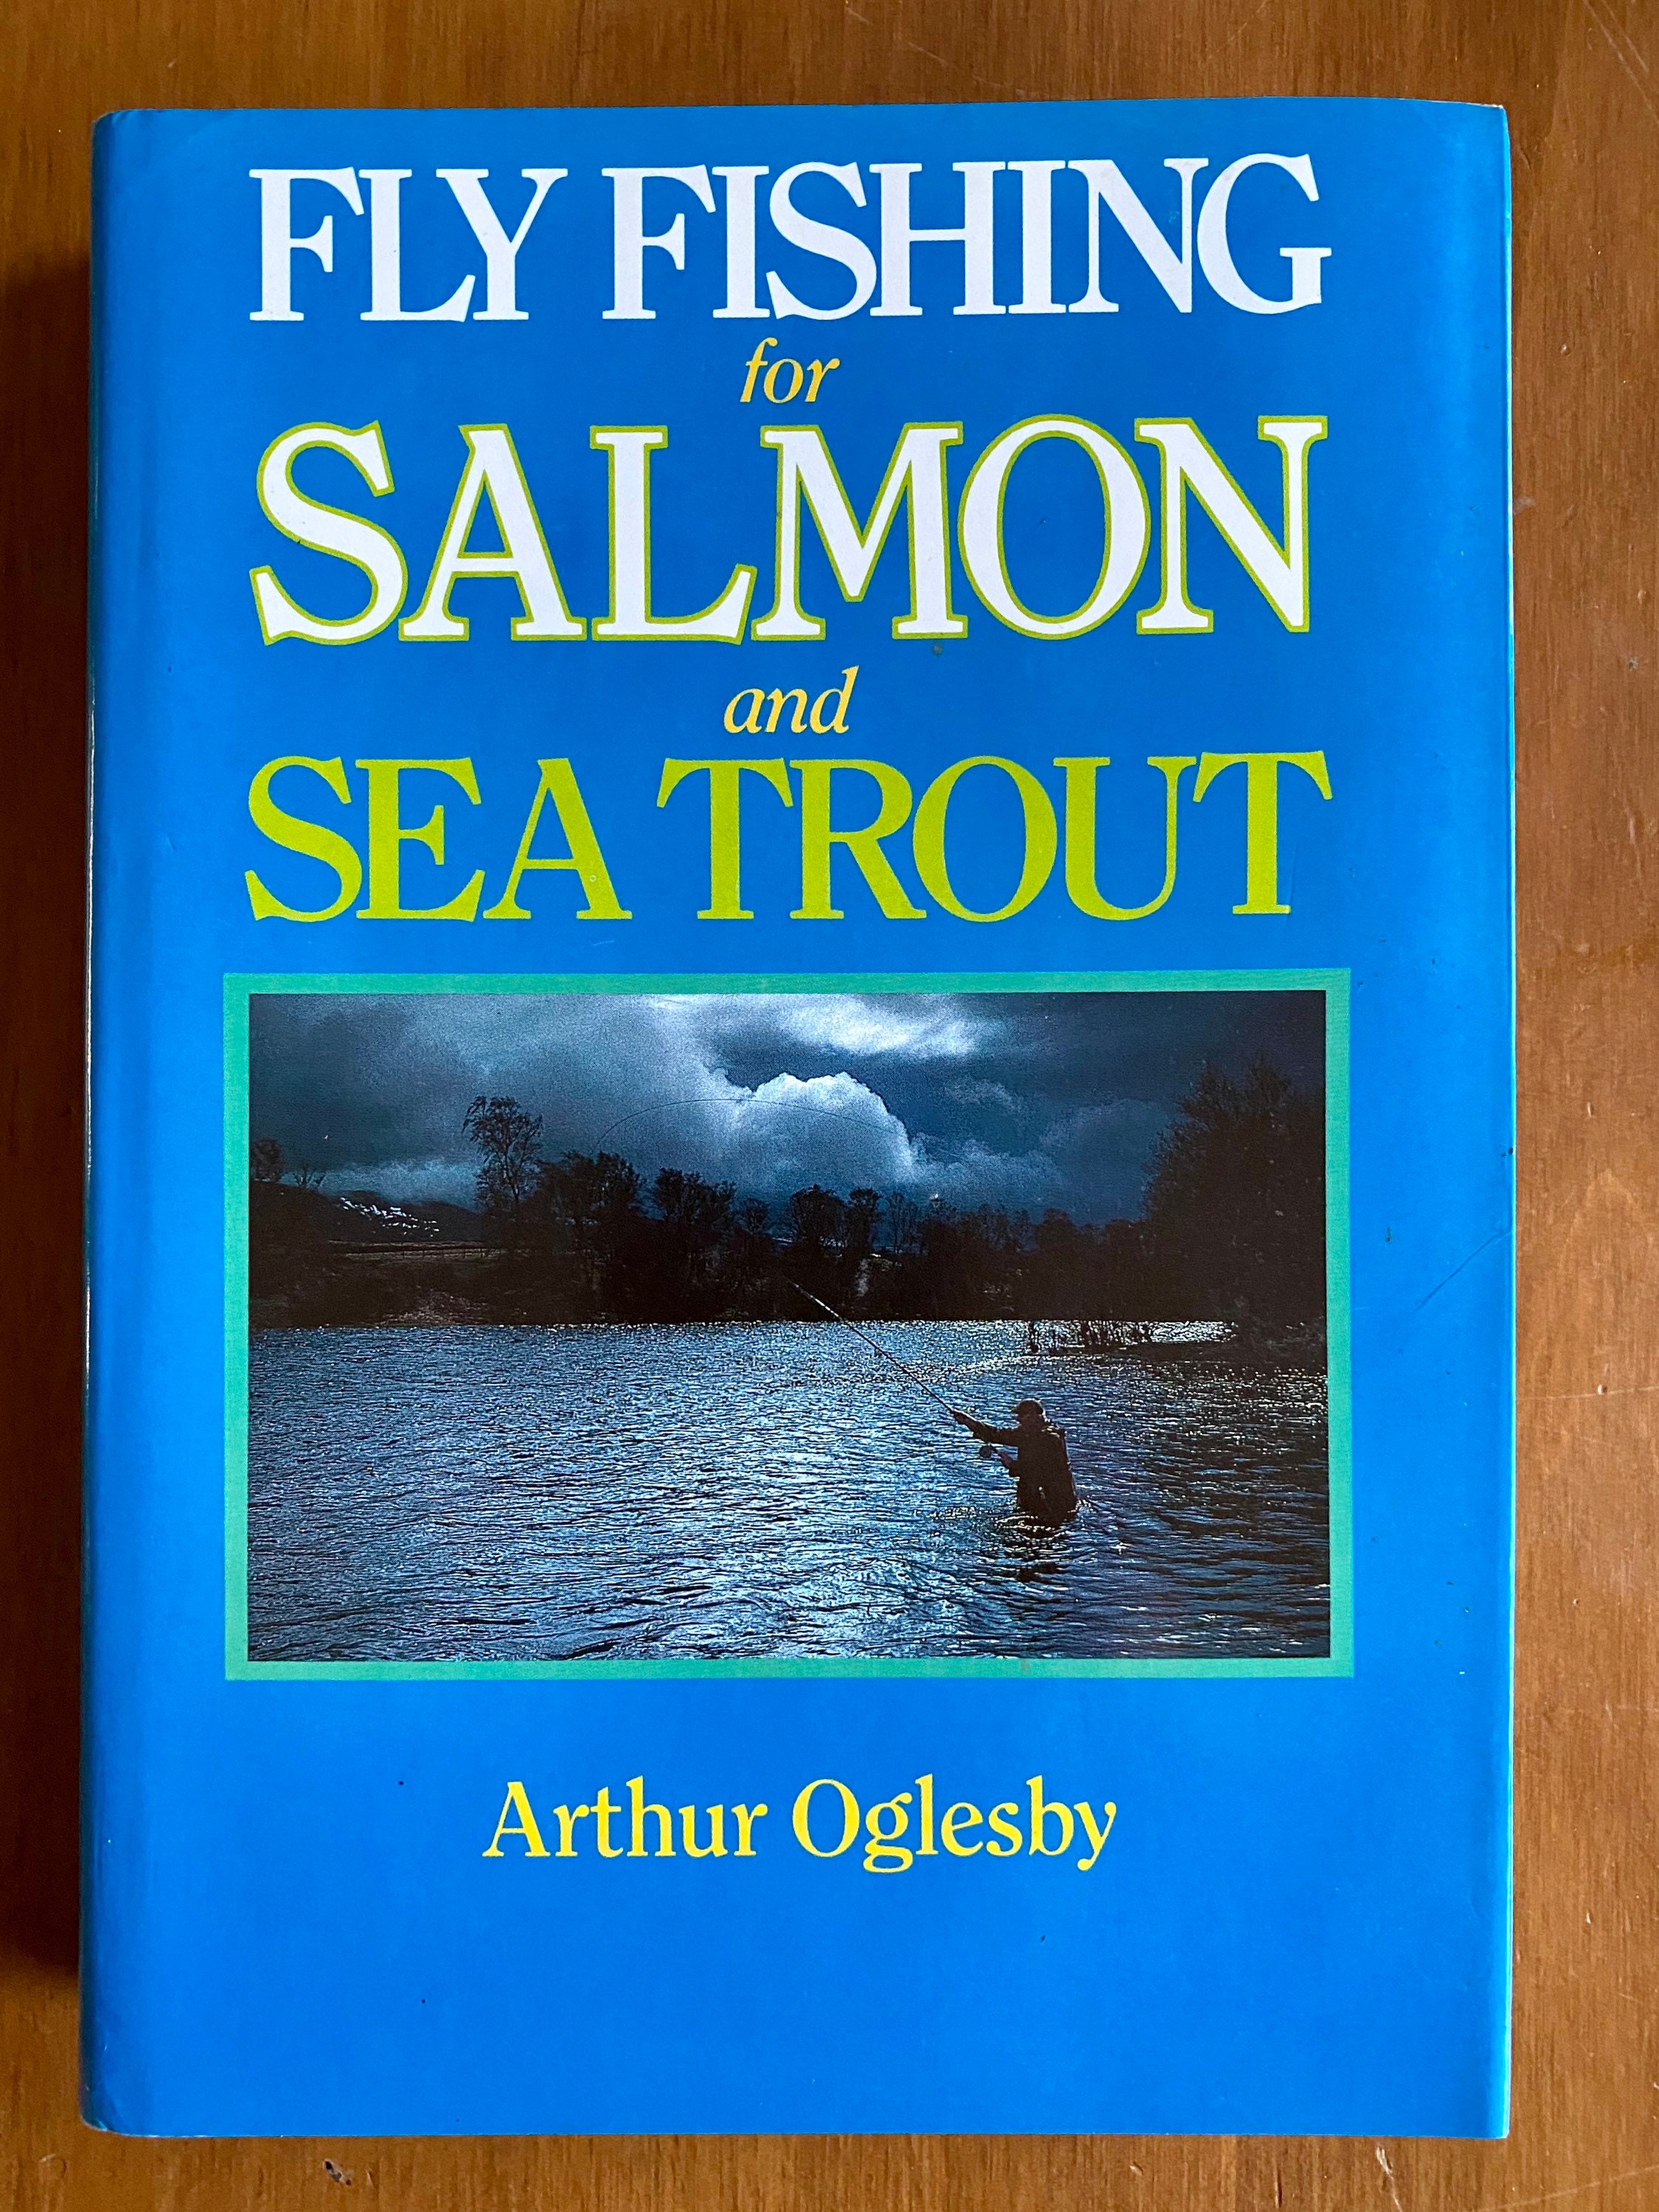 Fly Fishing for Salmon and Sea Trout. Arthur Oglesby. Classic 1st